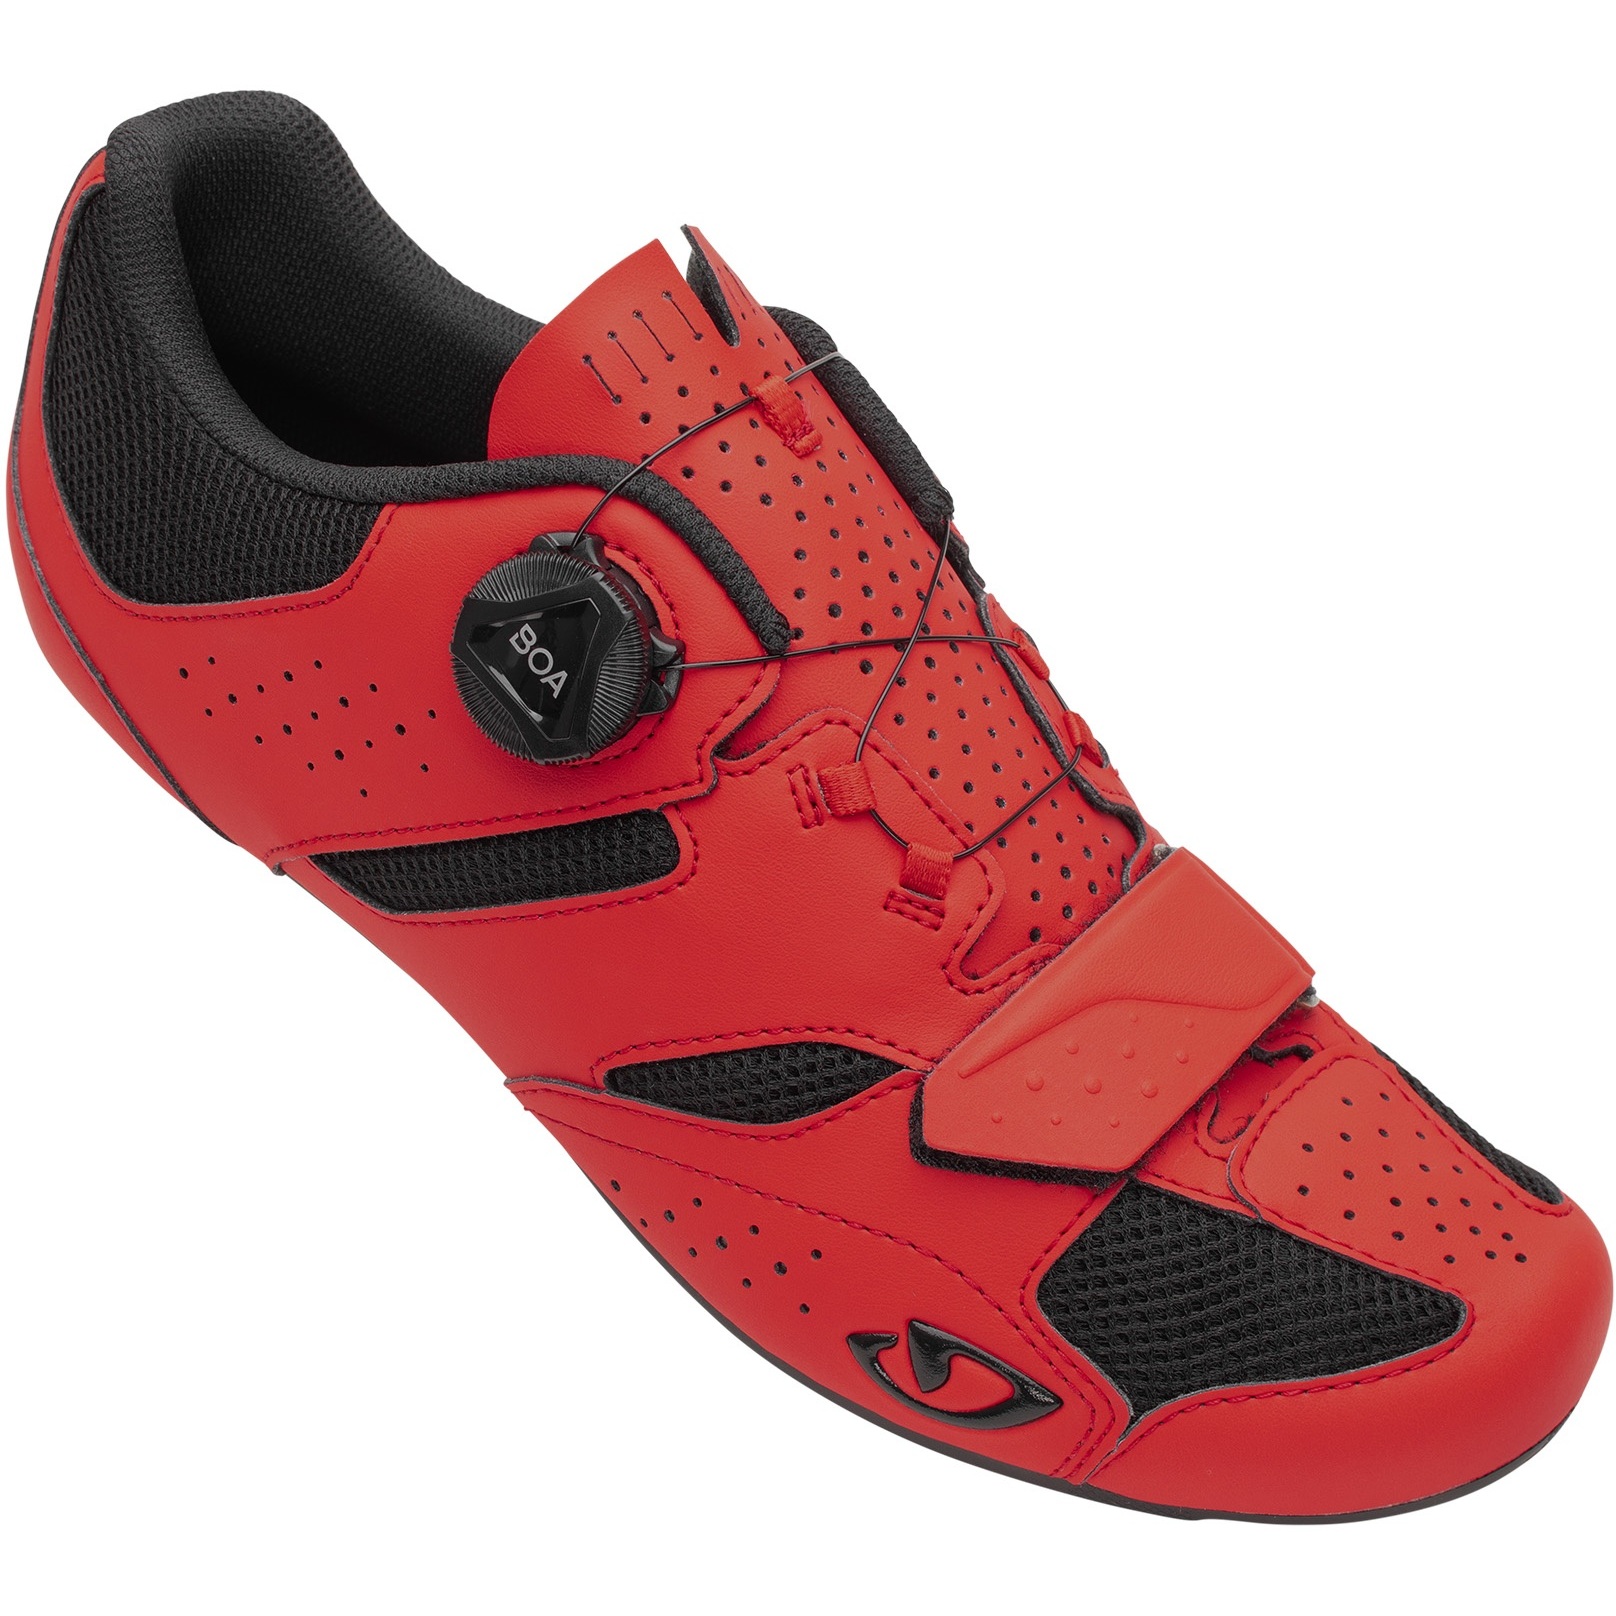 Picture of Giro Savix II Road Shoes - bright red